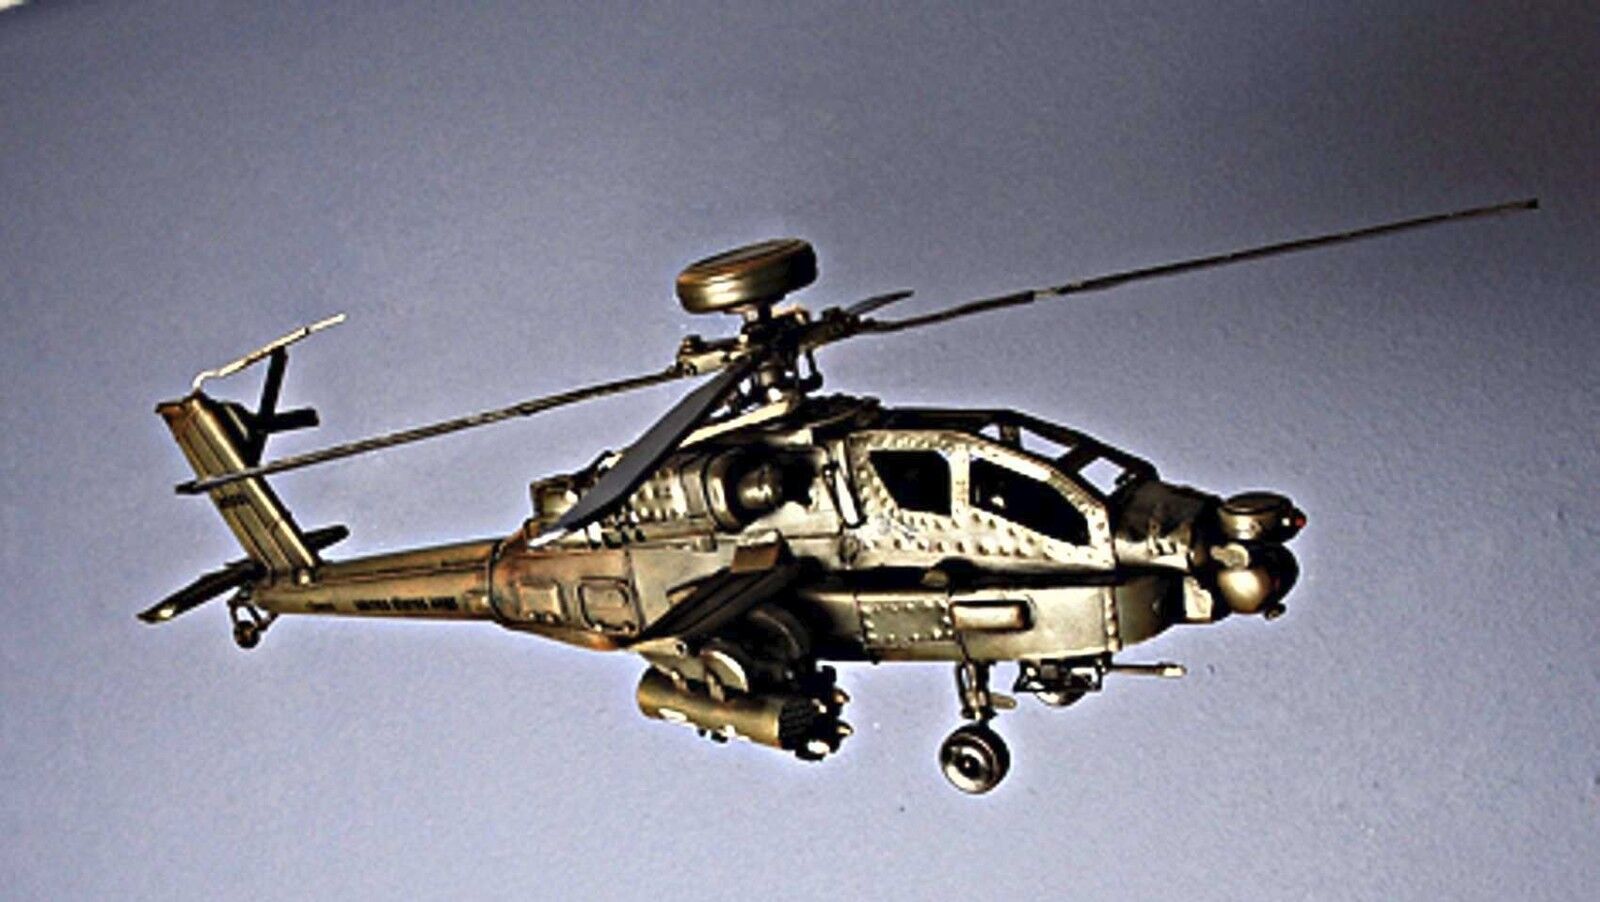 Model Apache Ah-64 Helicopter 1:24 Scale from Authentic Models